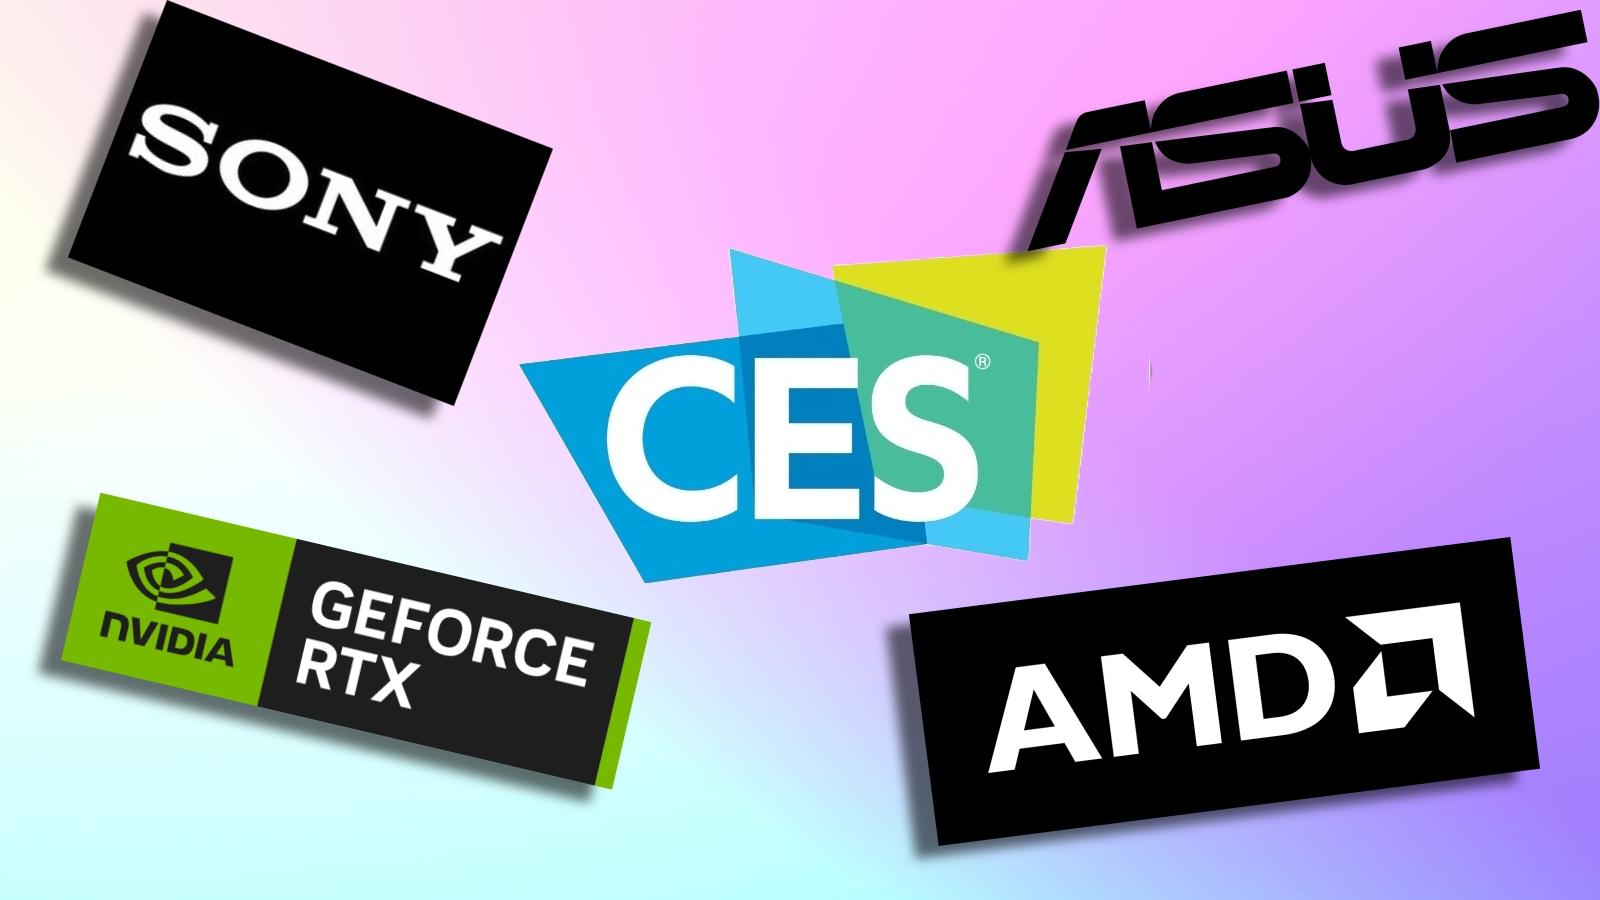 CES logo on purple background with Geforce, Sony, Asus and AMD logos